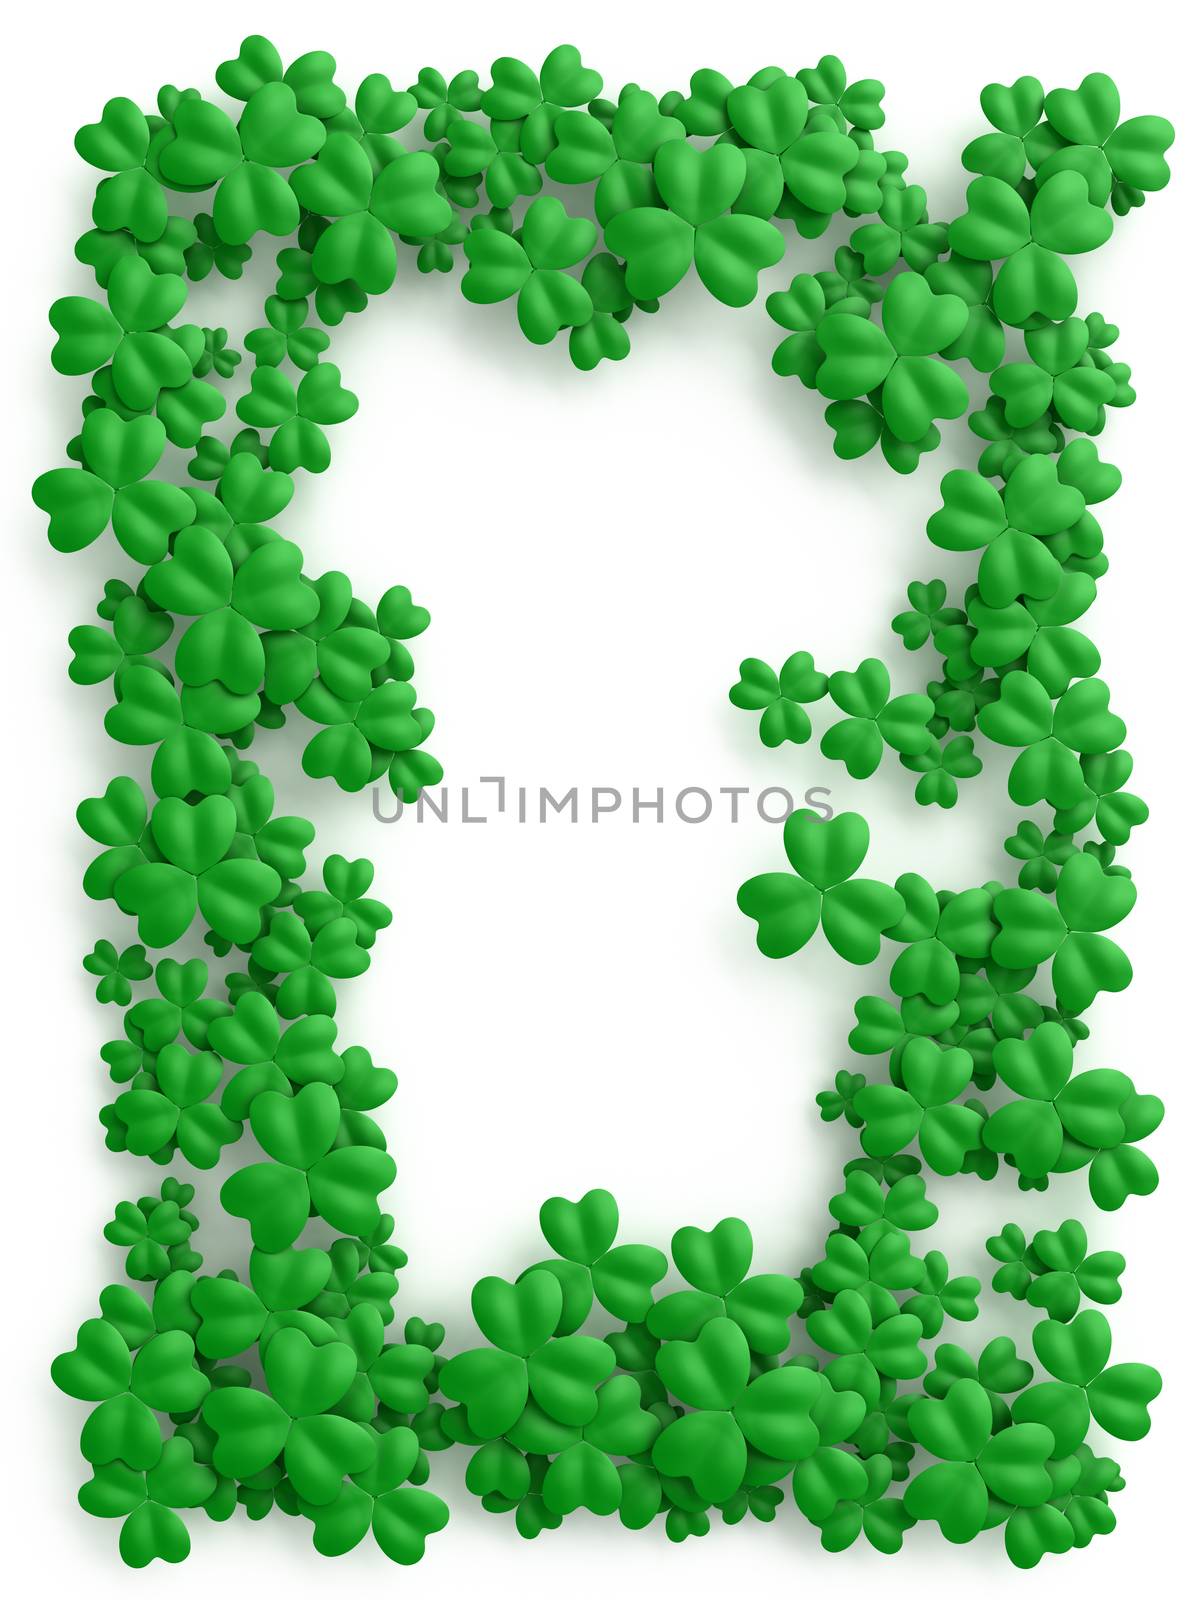 Clover background for St. Patrick Day with free space in center